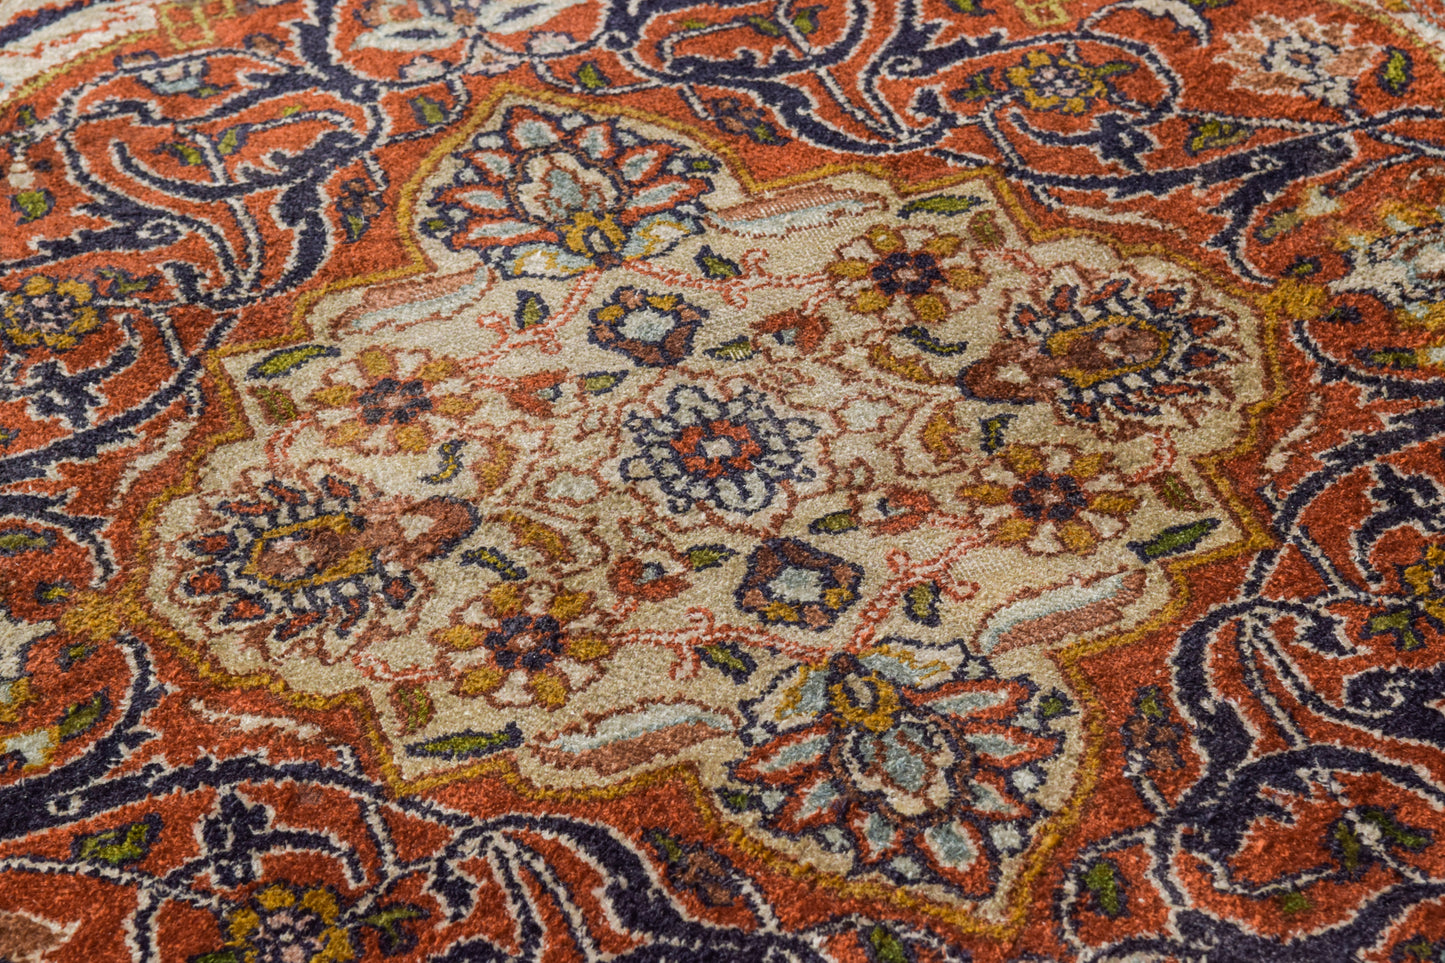 Handwoven Medallion Rug With Flowers